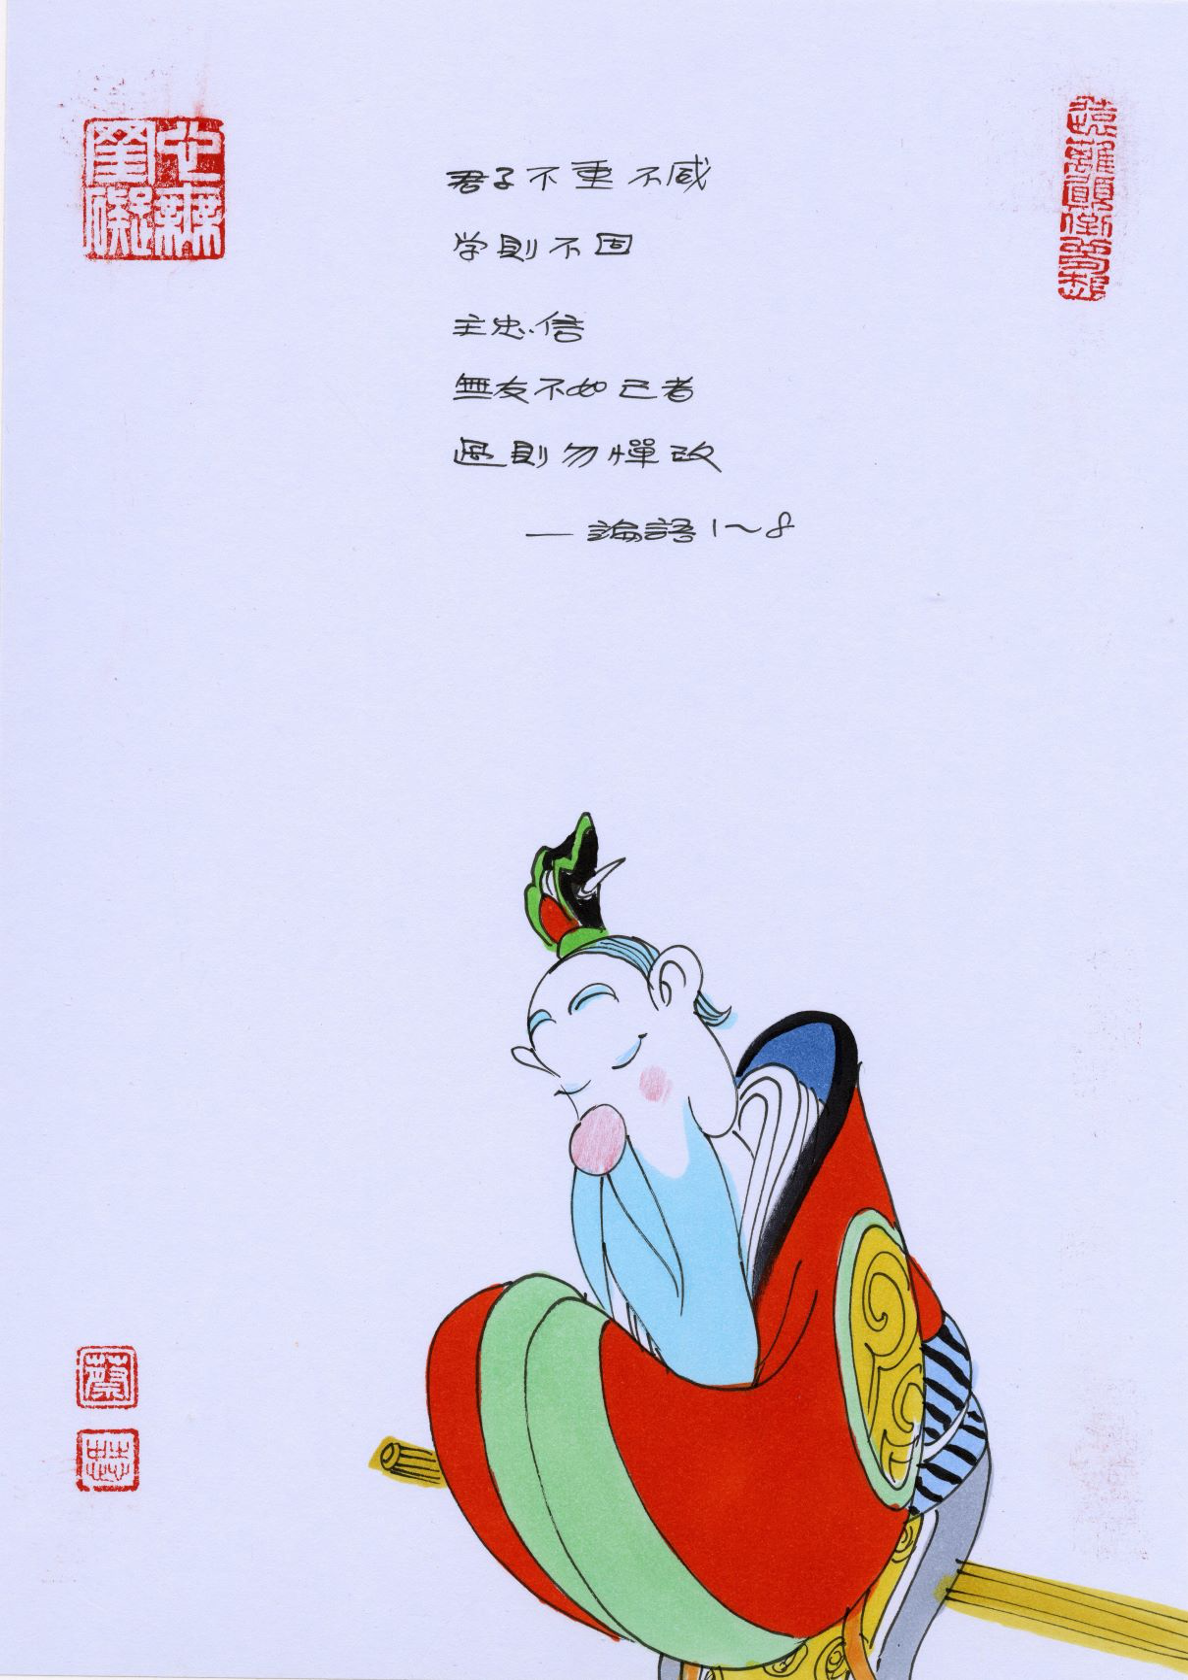 Confucius Asks about the Ceremony, Tsai Chih Chung 《孔子问礼》蔡志忠